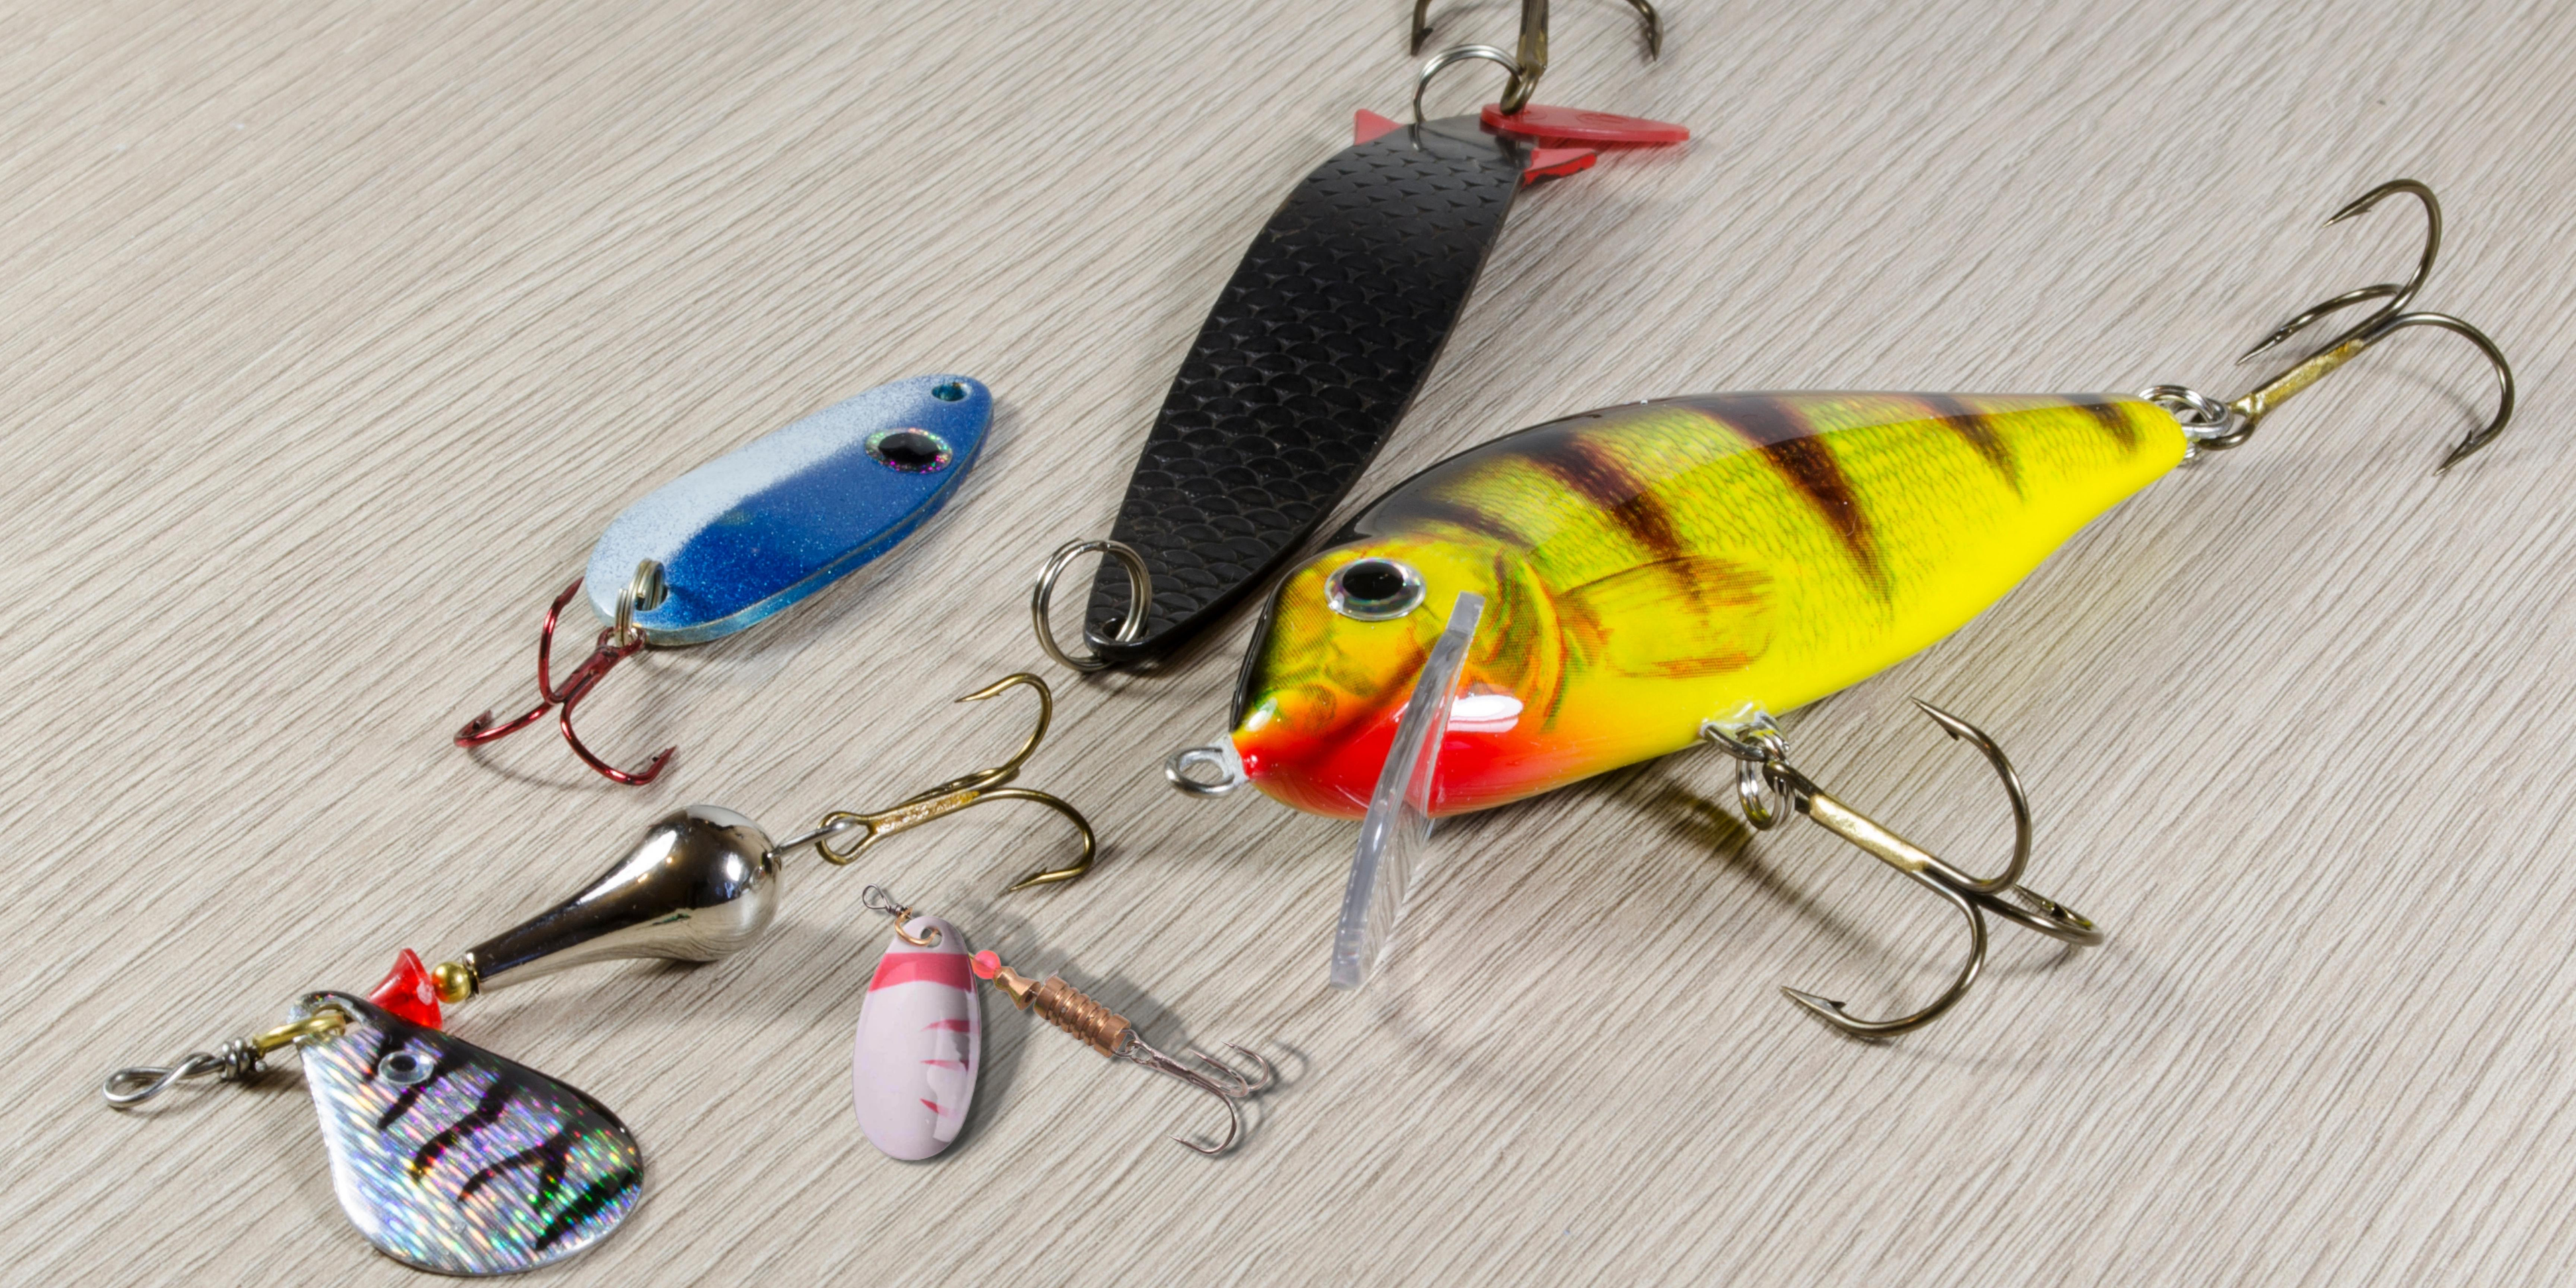 Fishing with lures: a complete guide for beginners - Fishsurfing